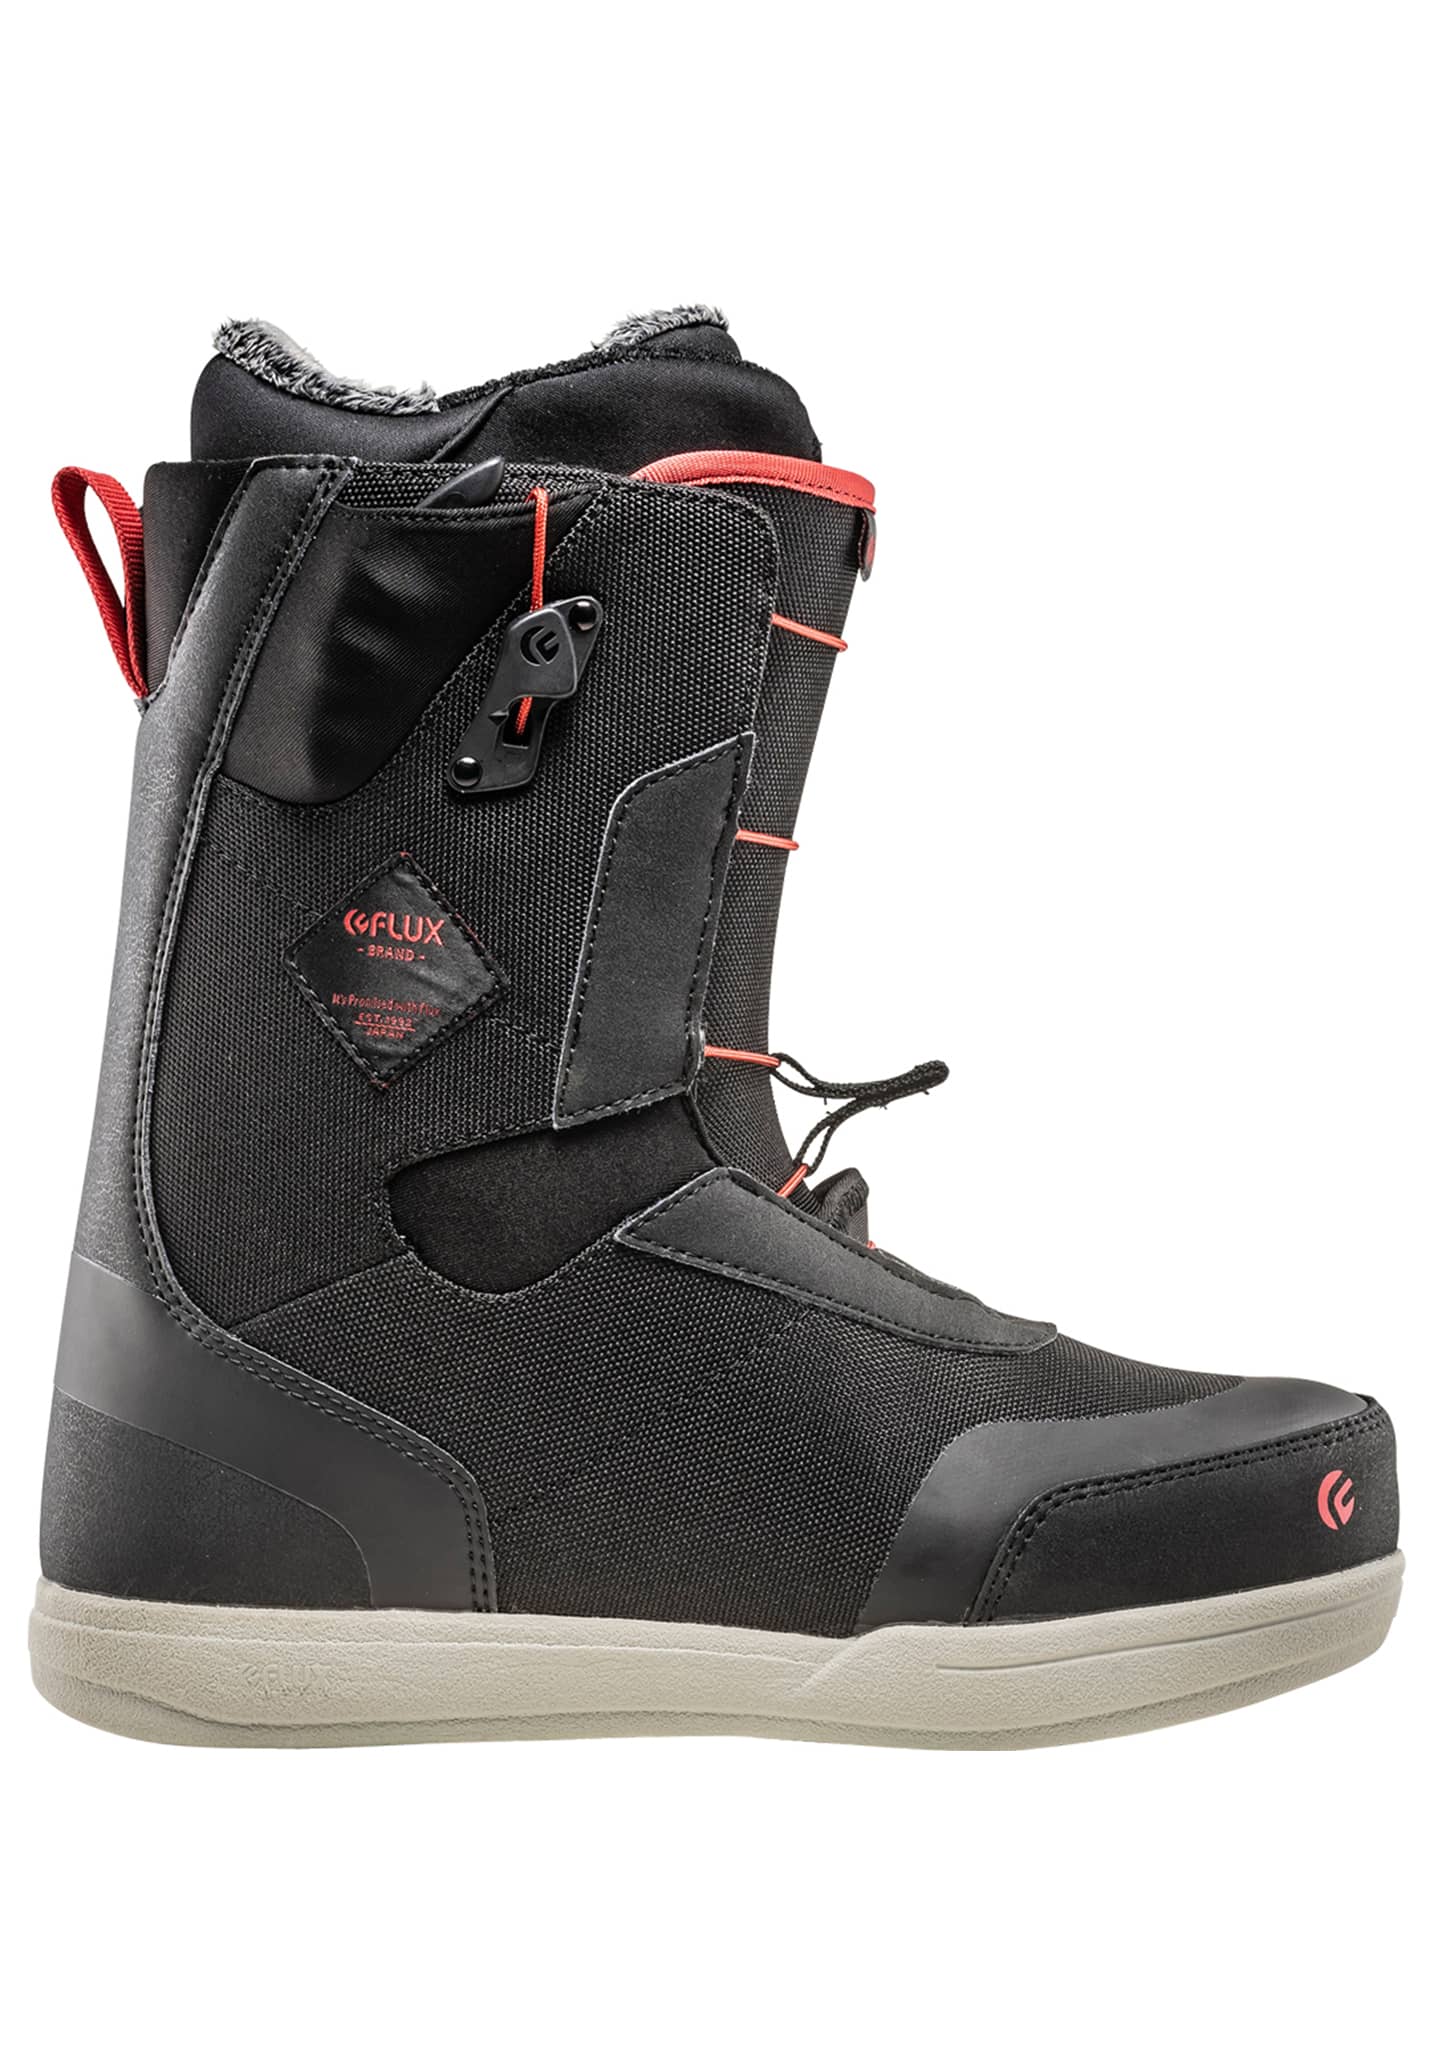 Flux GT-Speed All Mountain Snowboard Boots black 45